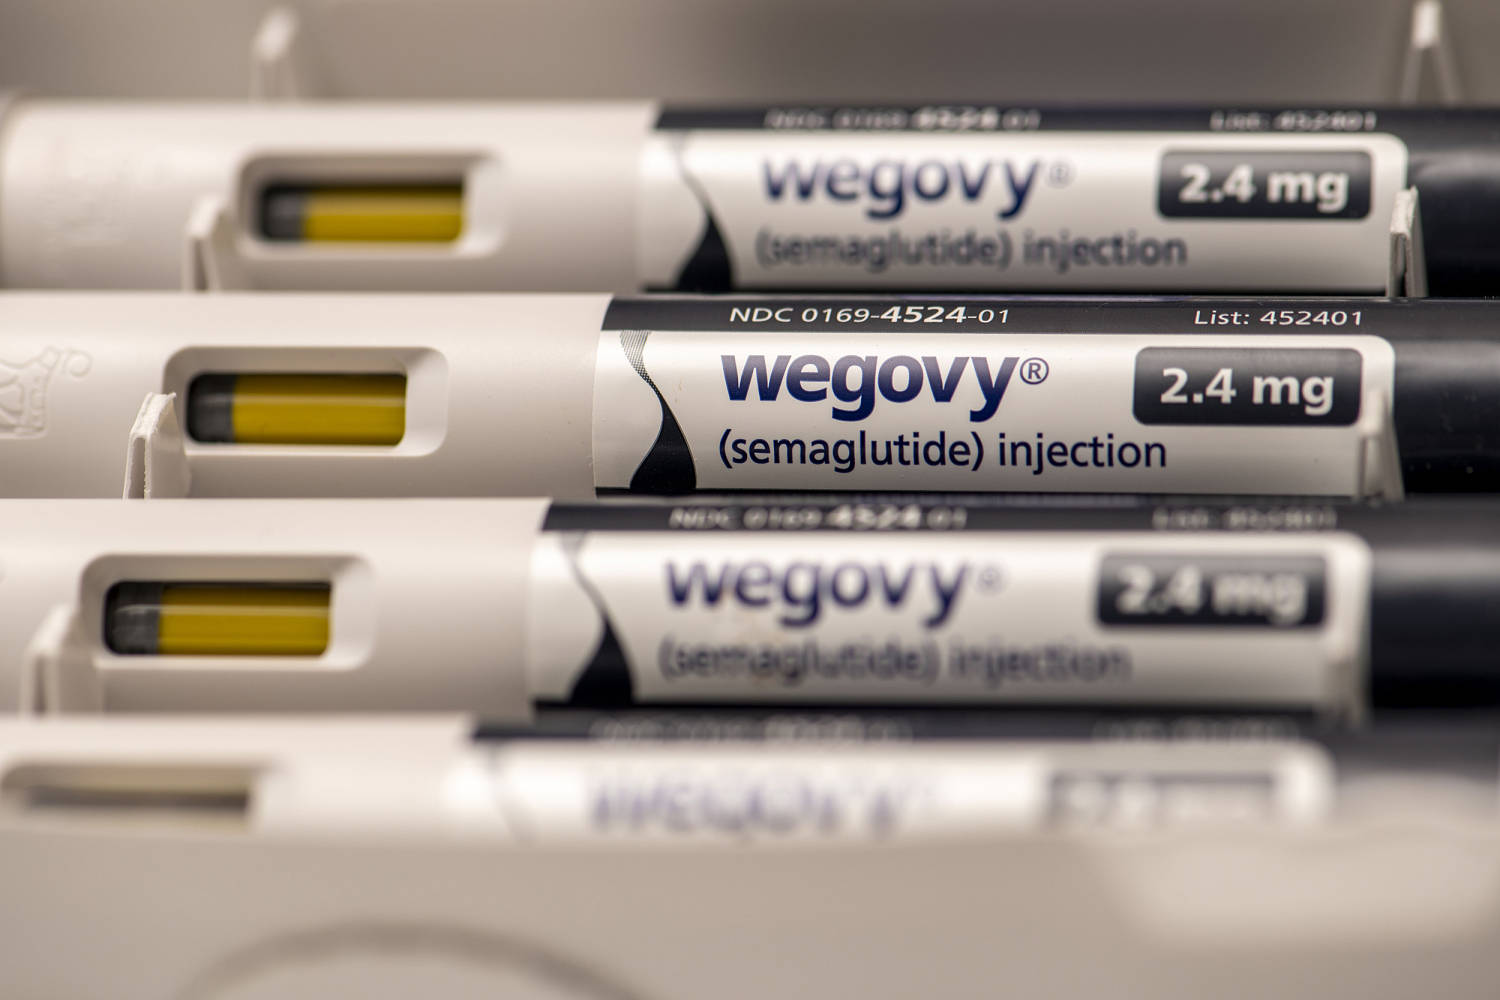 Novo Nordisk says more patients can start taking Wegovy after it boosts supply